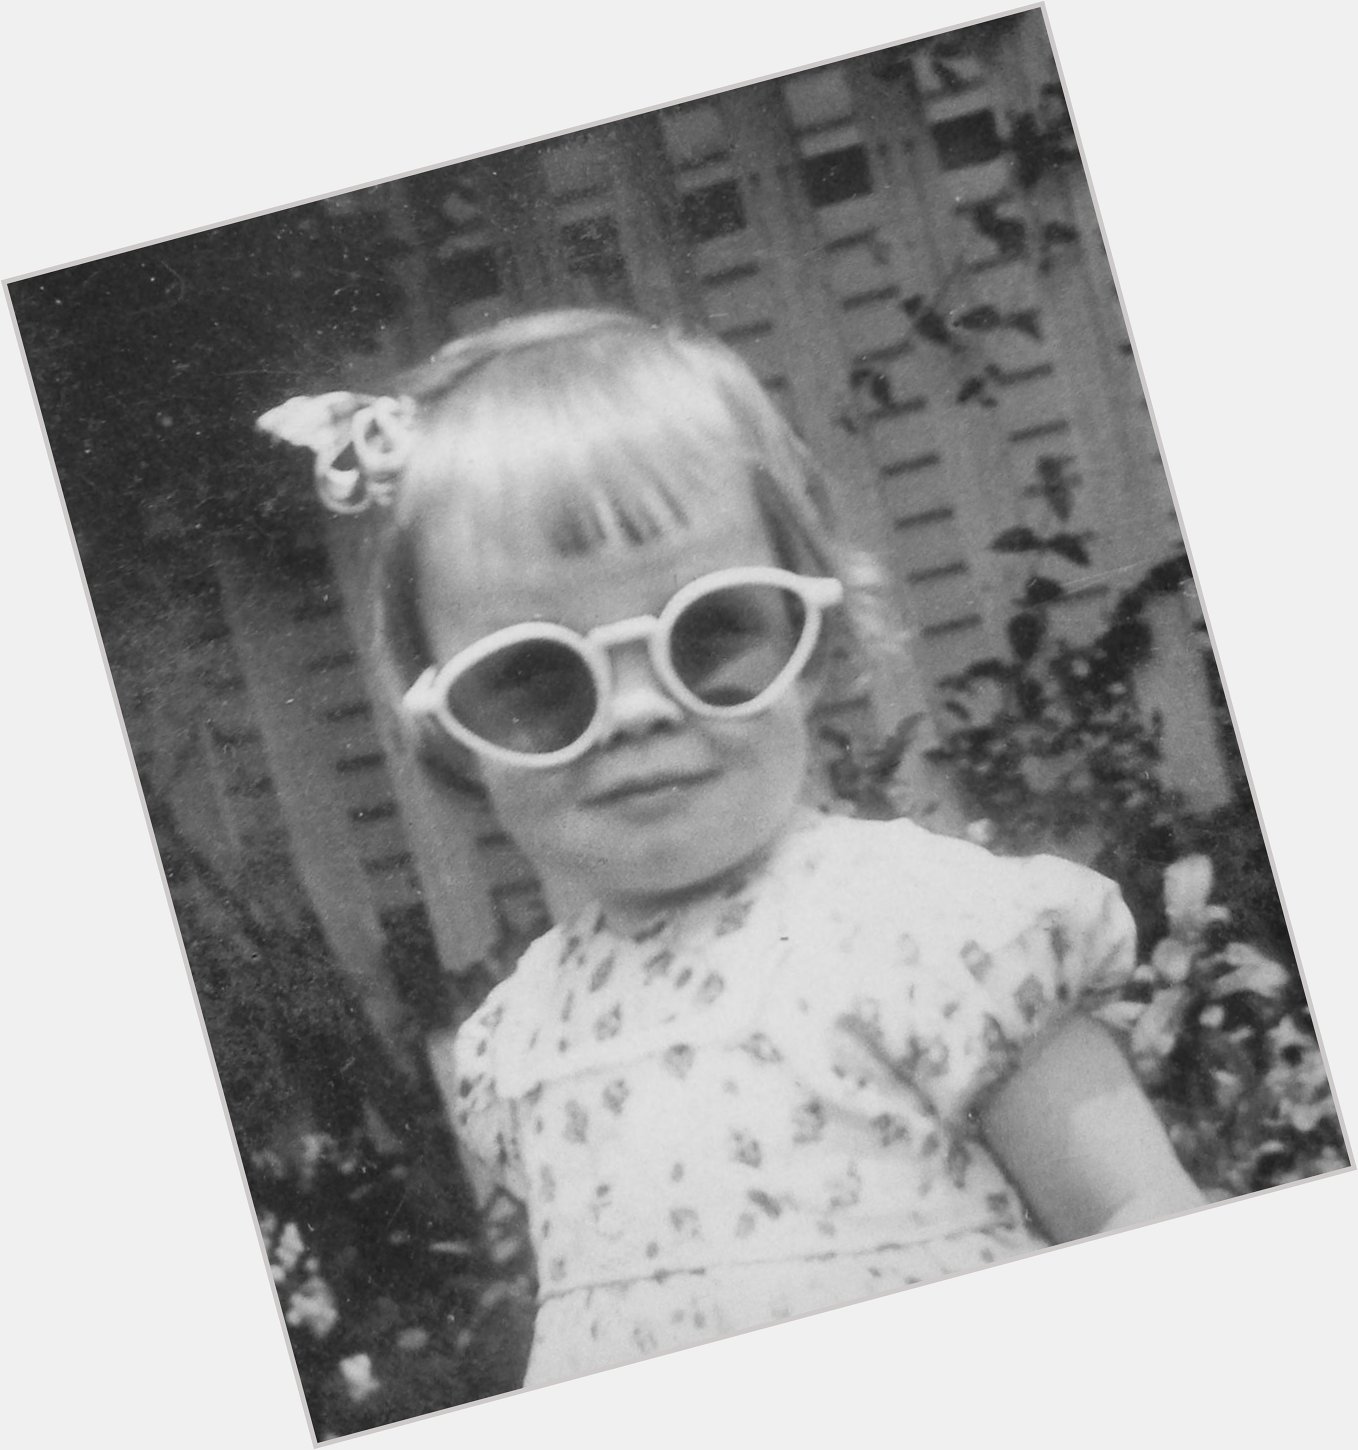 \" Happy Birthday to DIANE KEATON!
Even at 4yrs old she had her own style. 